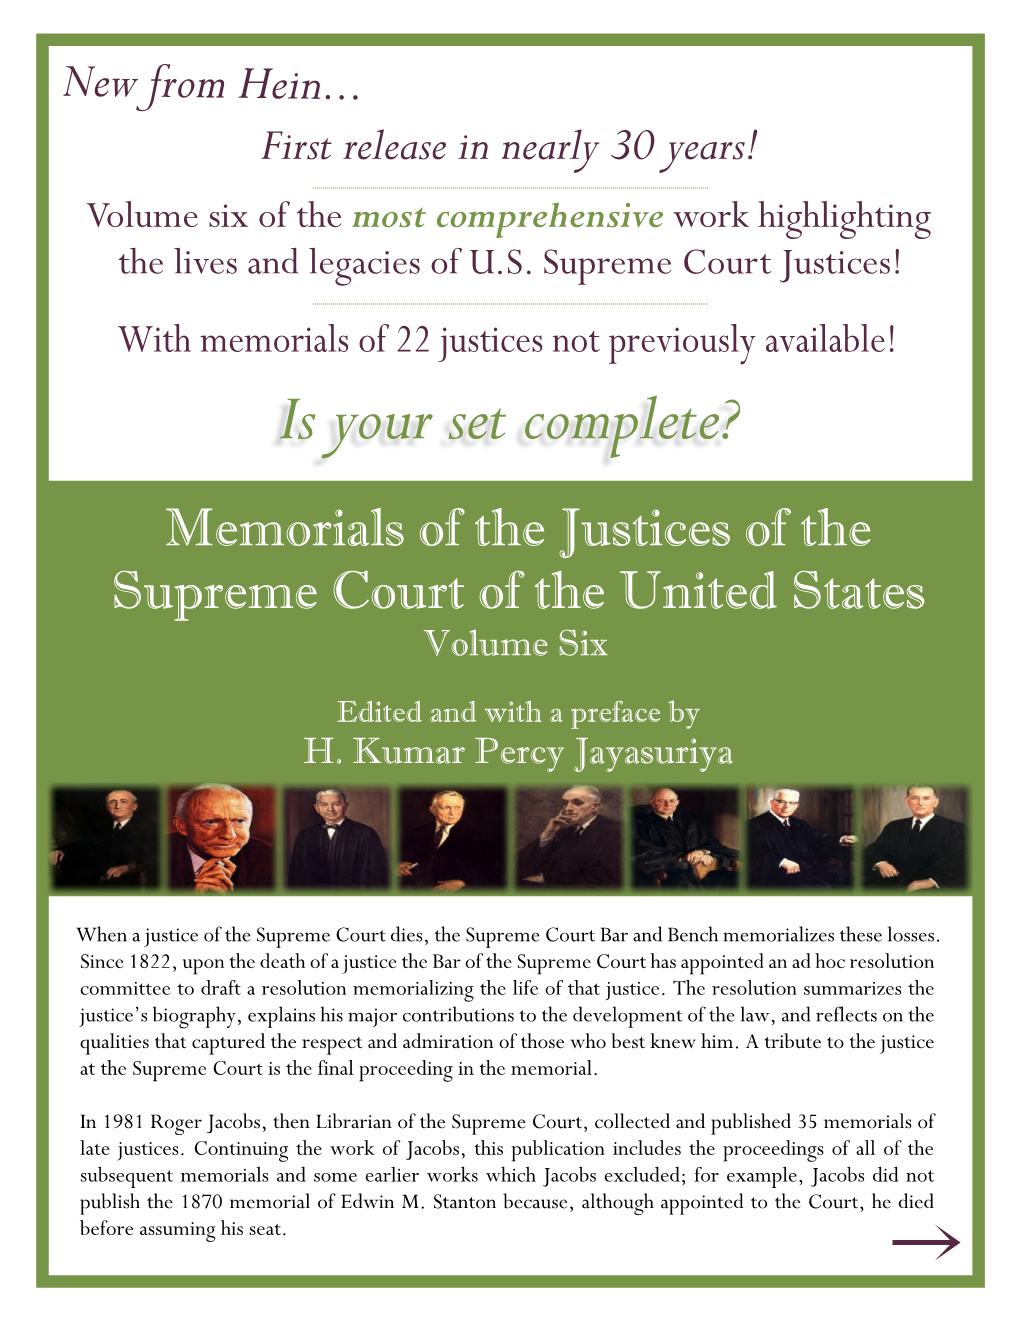 Volume Six of the Most Comprehensive Work Highlighting the Lives and Legacies of US Supreme Court Justices!